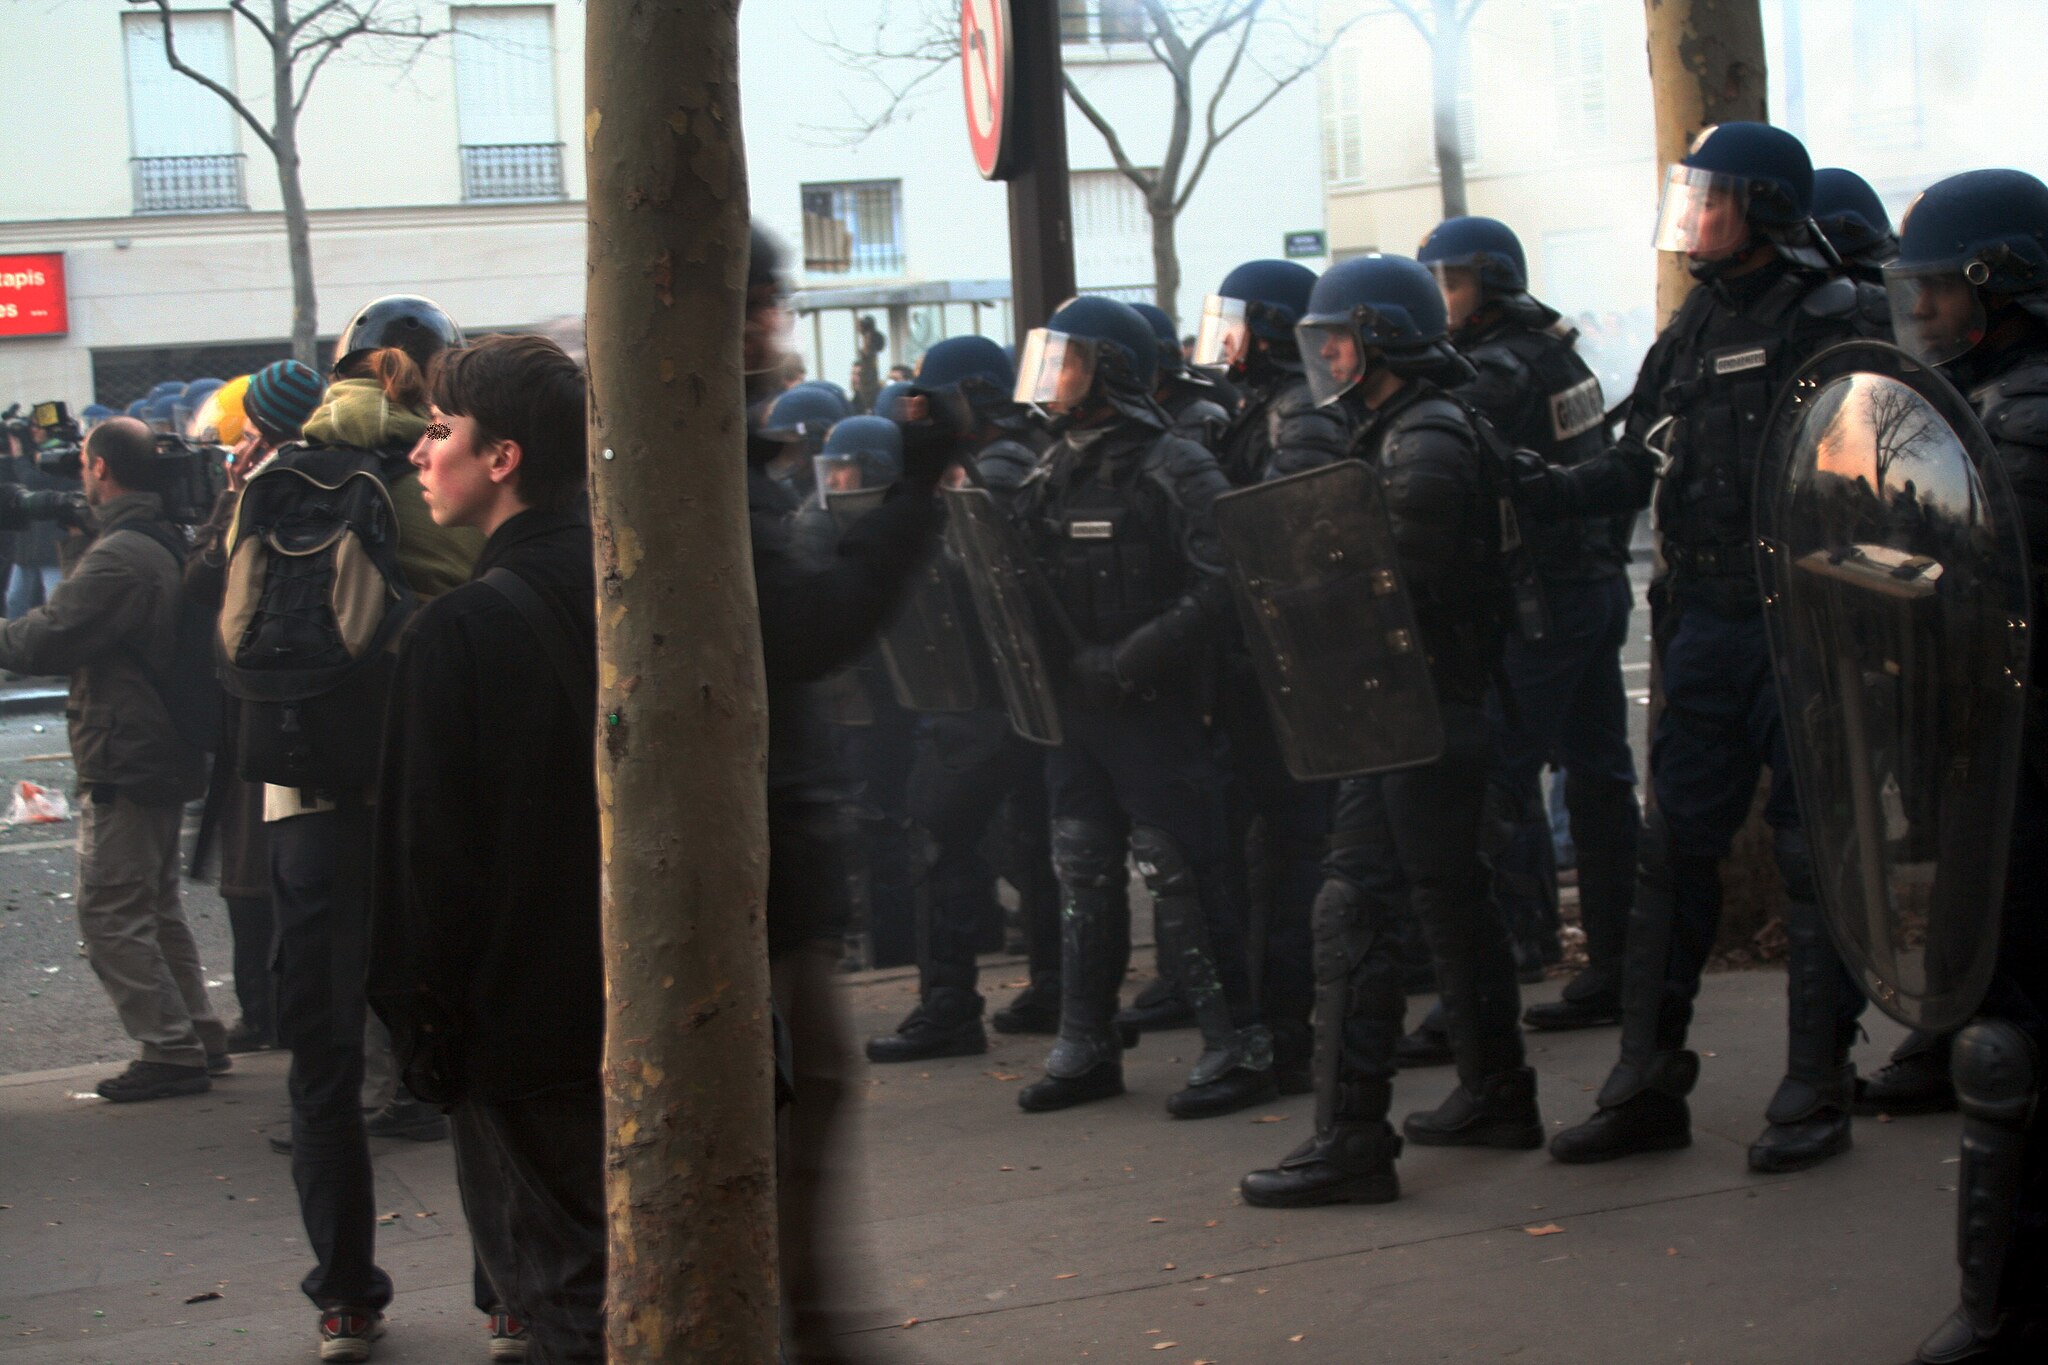 France protests continue over fatal police shooting of North African 17-year-old